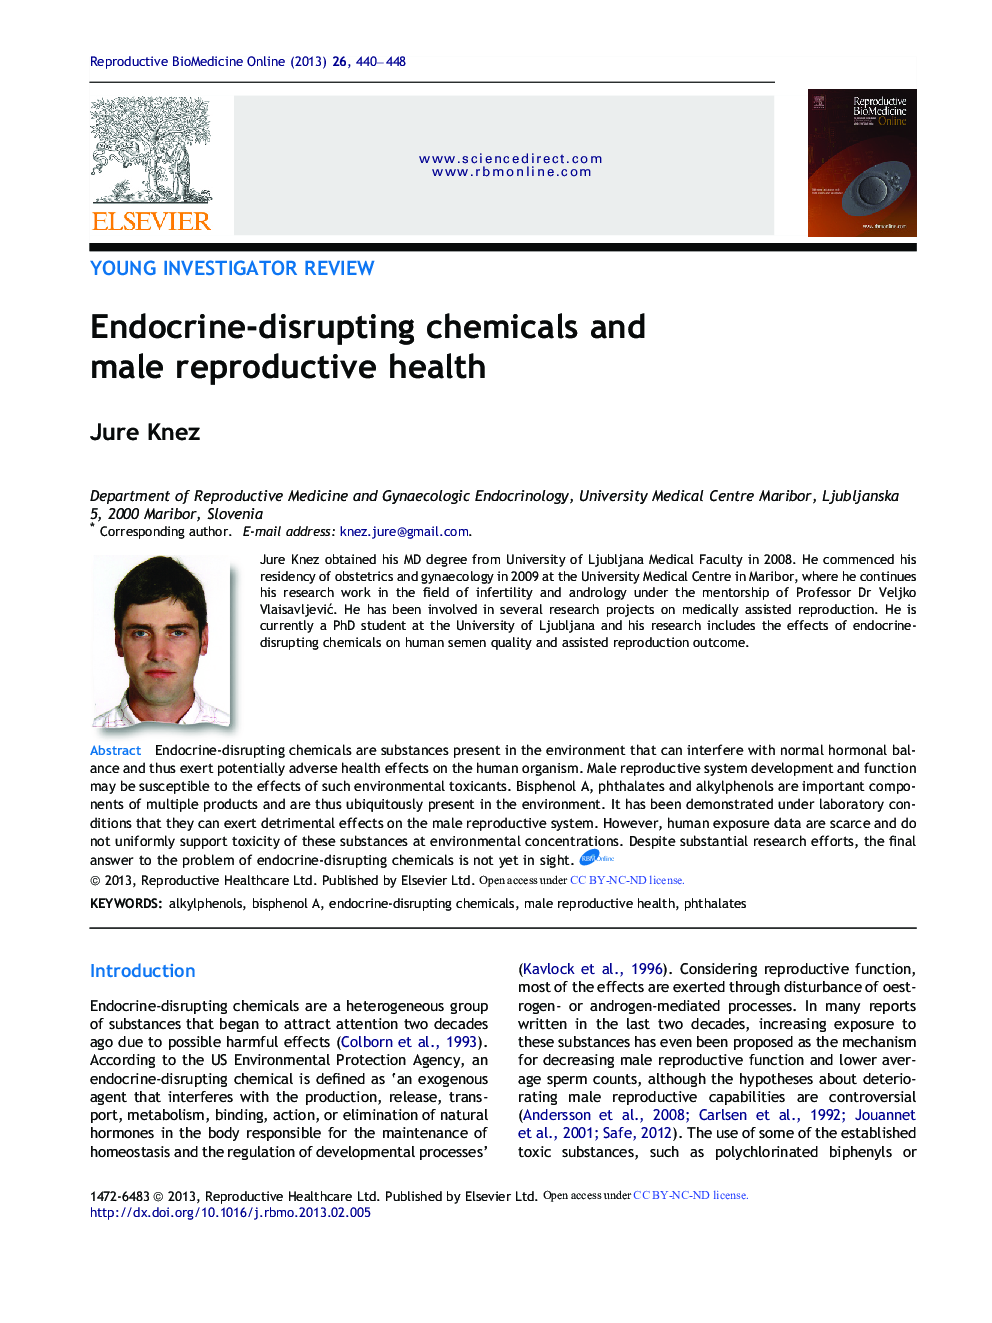 Endocrine-disrupting chemicals and male reproductive health